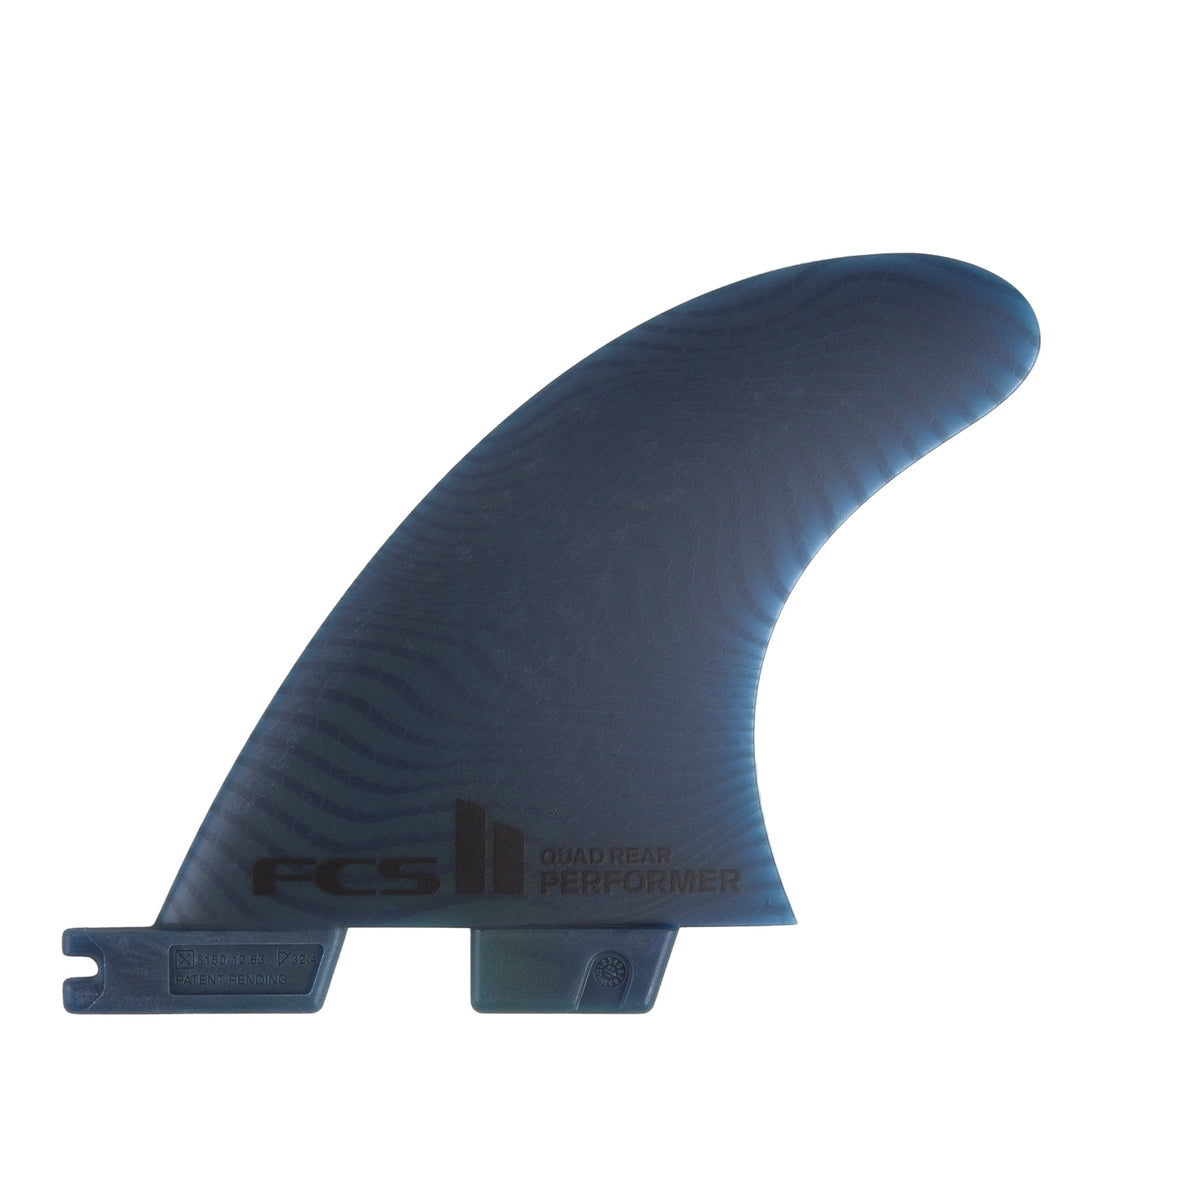 II Performer Neo Glass Pacific Quad Rear Fins